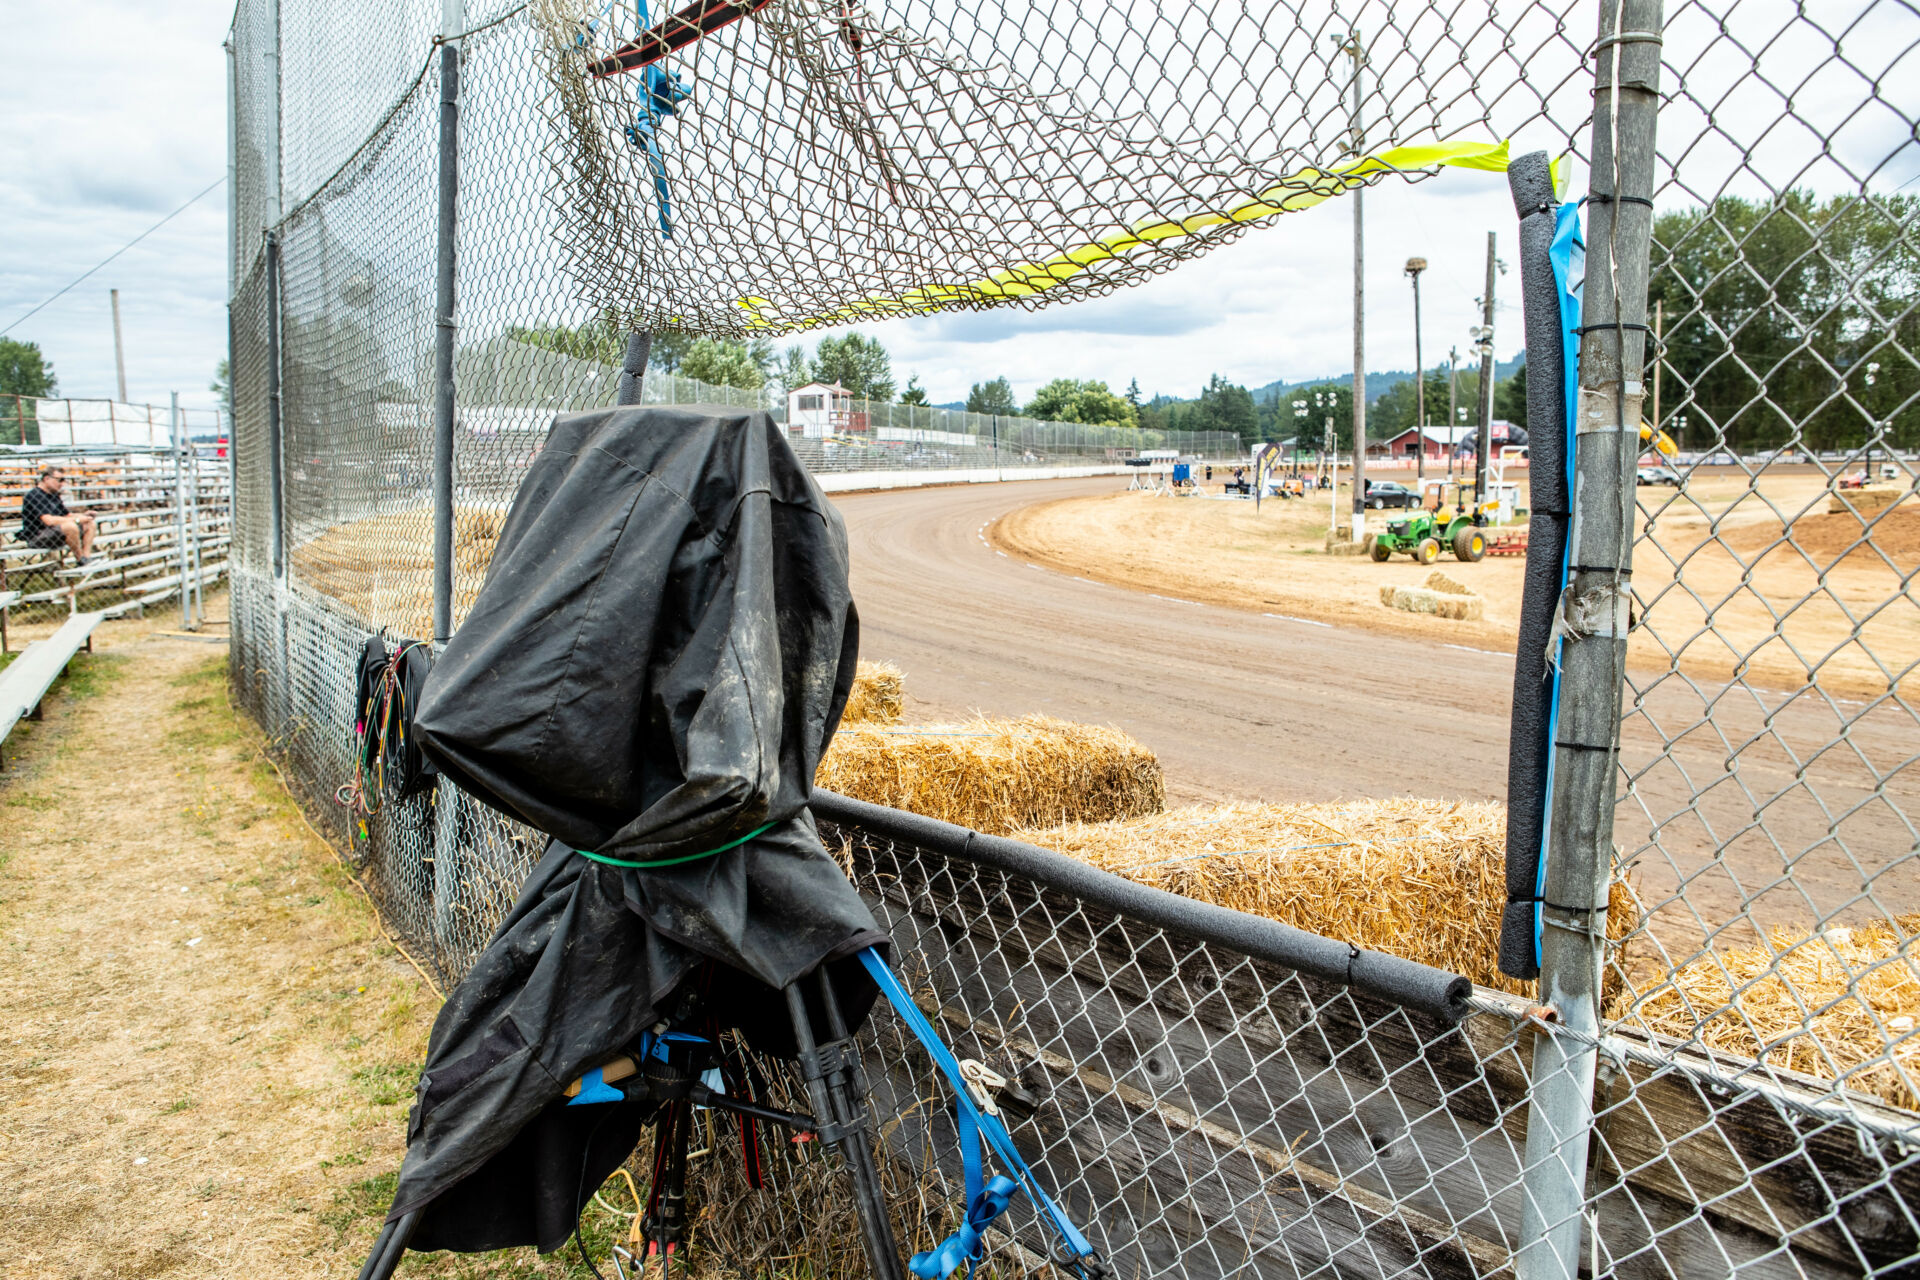 A view of Castle Rock Speedway. Photo by Tim Lester, courtesy AFT.